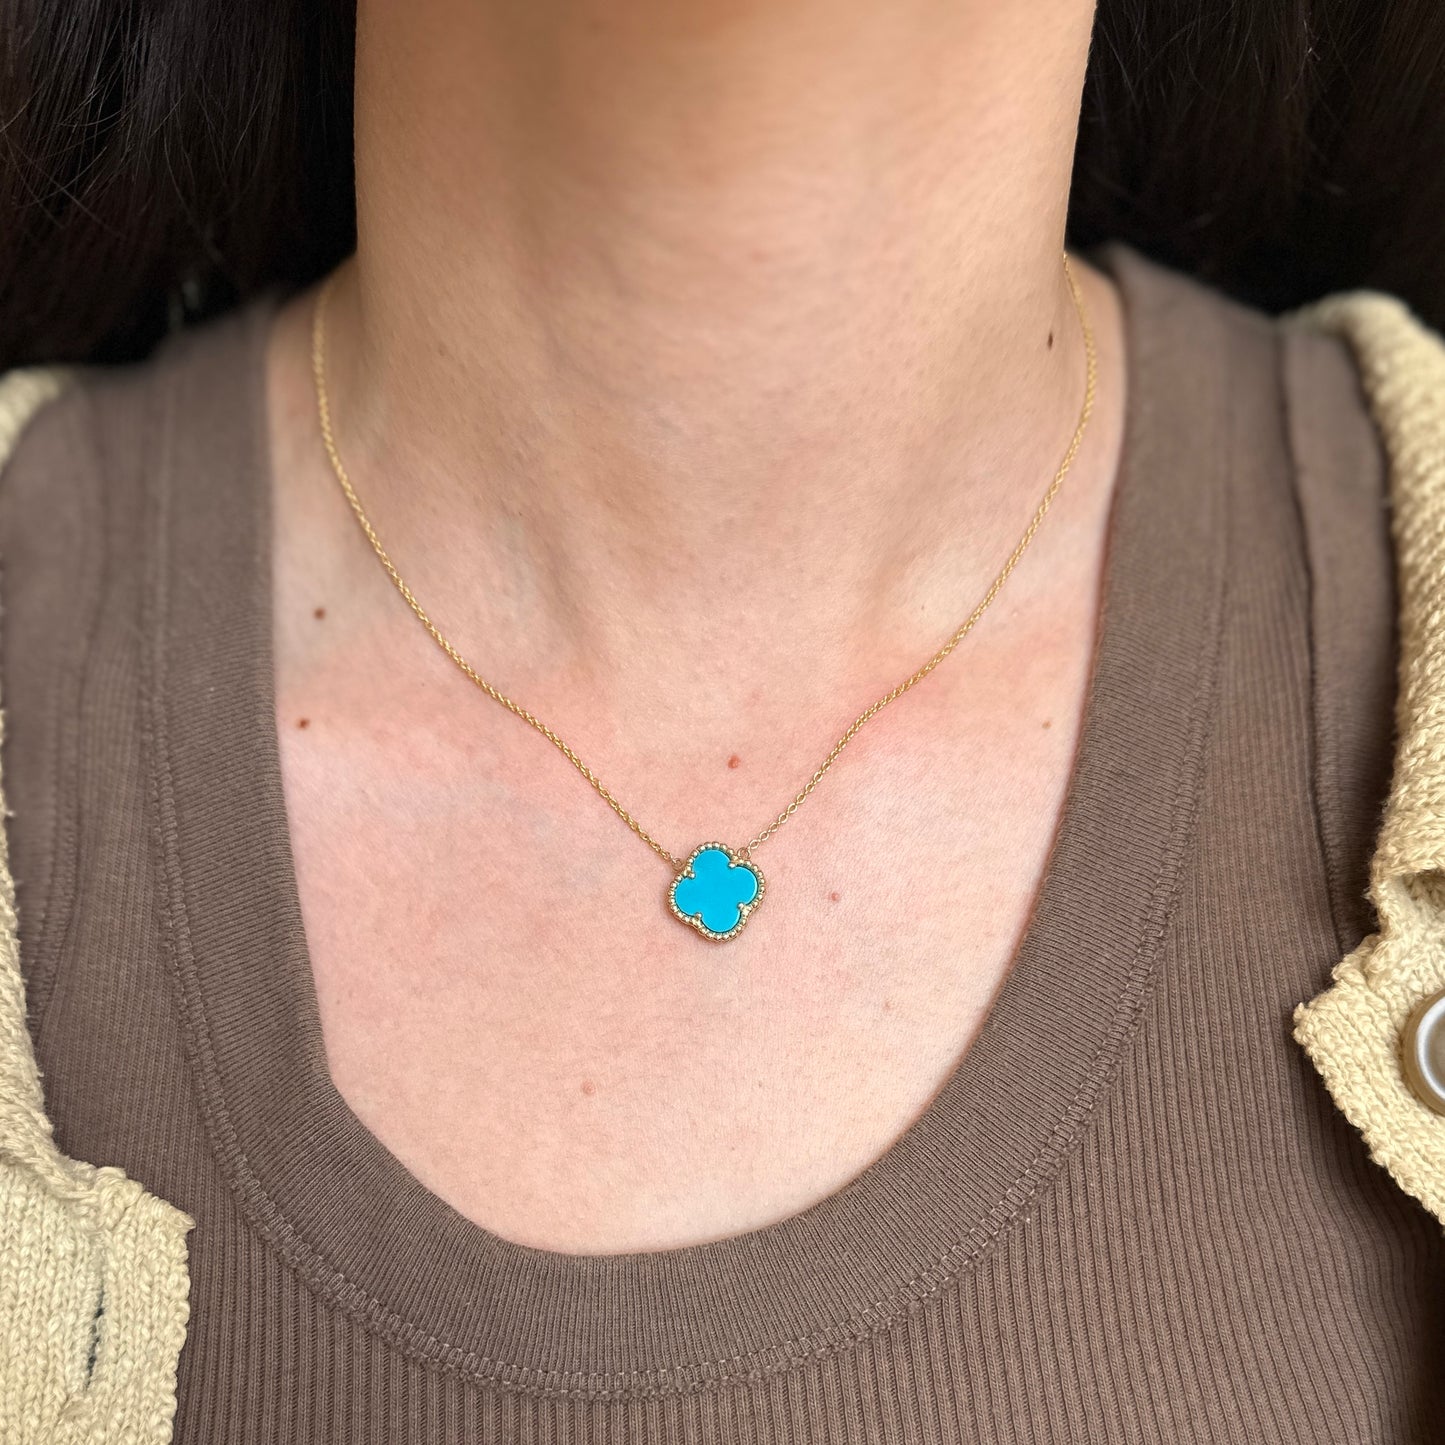 14KT Yellow Gold Turquoise 4 Leaf Clover Chain Necklace